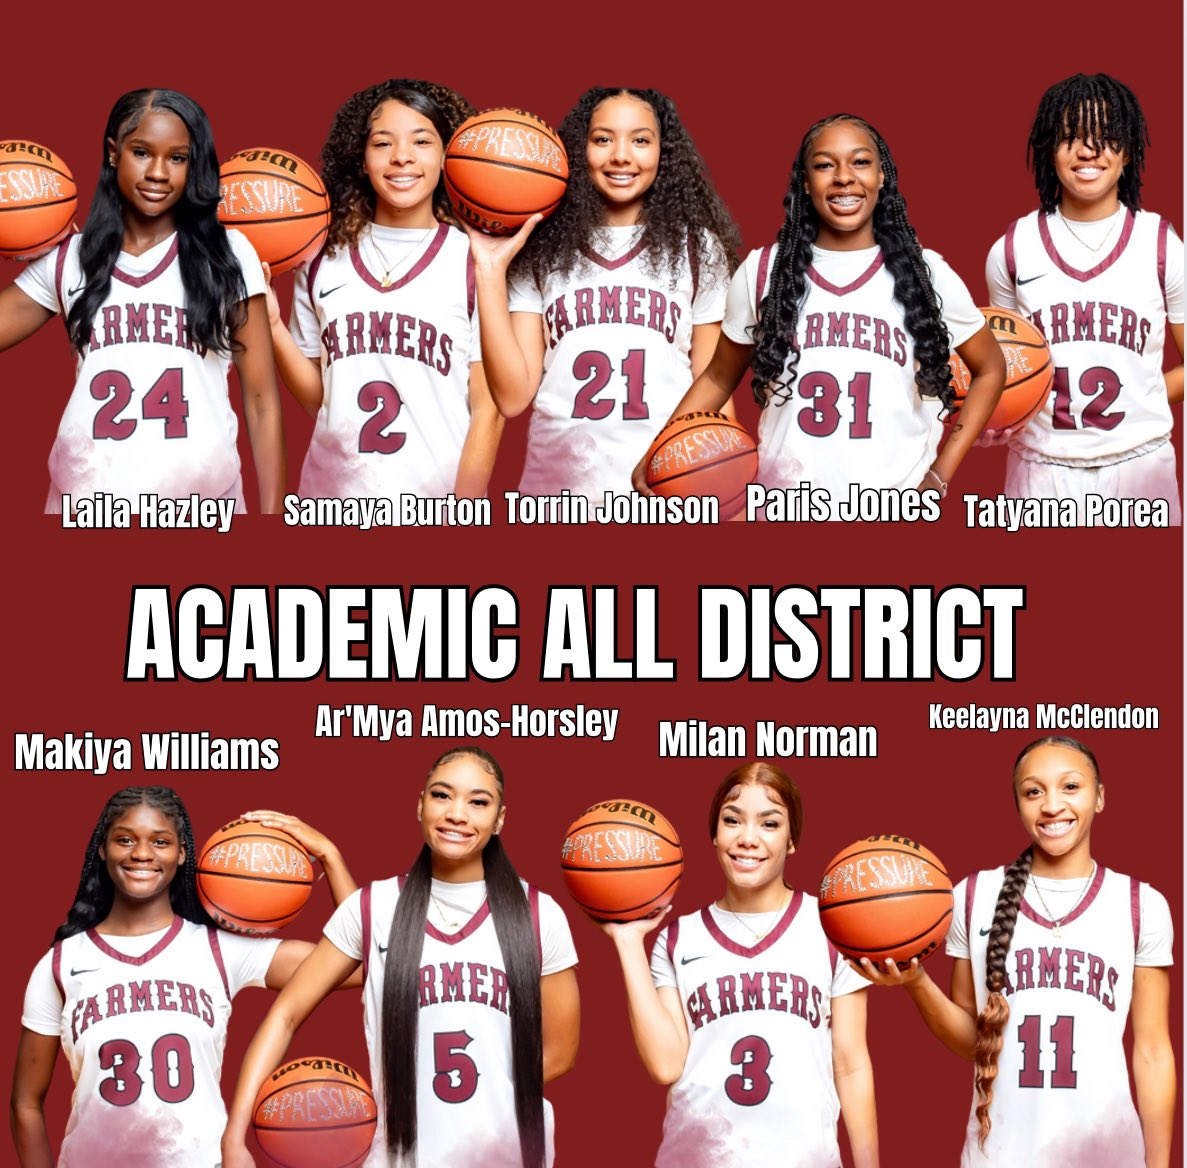 Congratulations to our players on the Academic All-District Team 🔥 #TheLewPressure